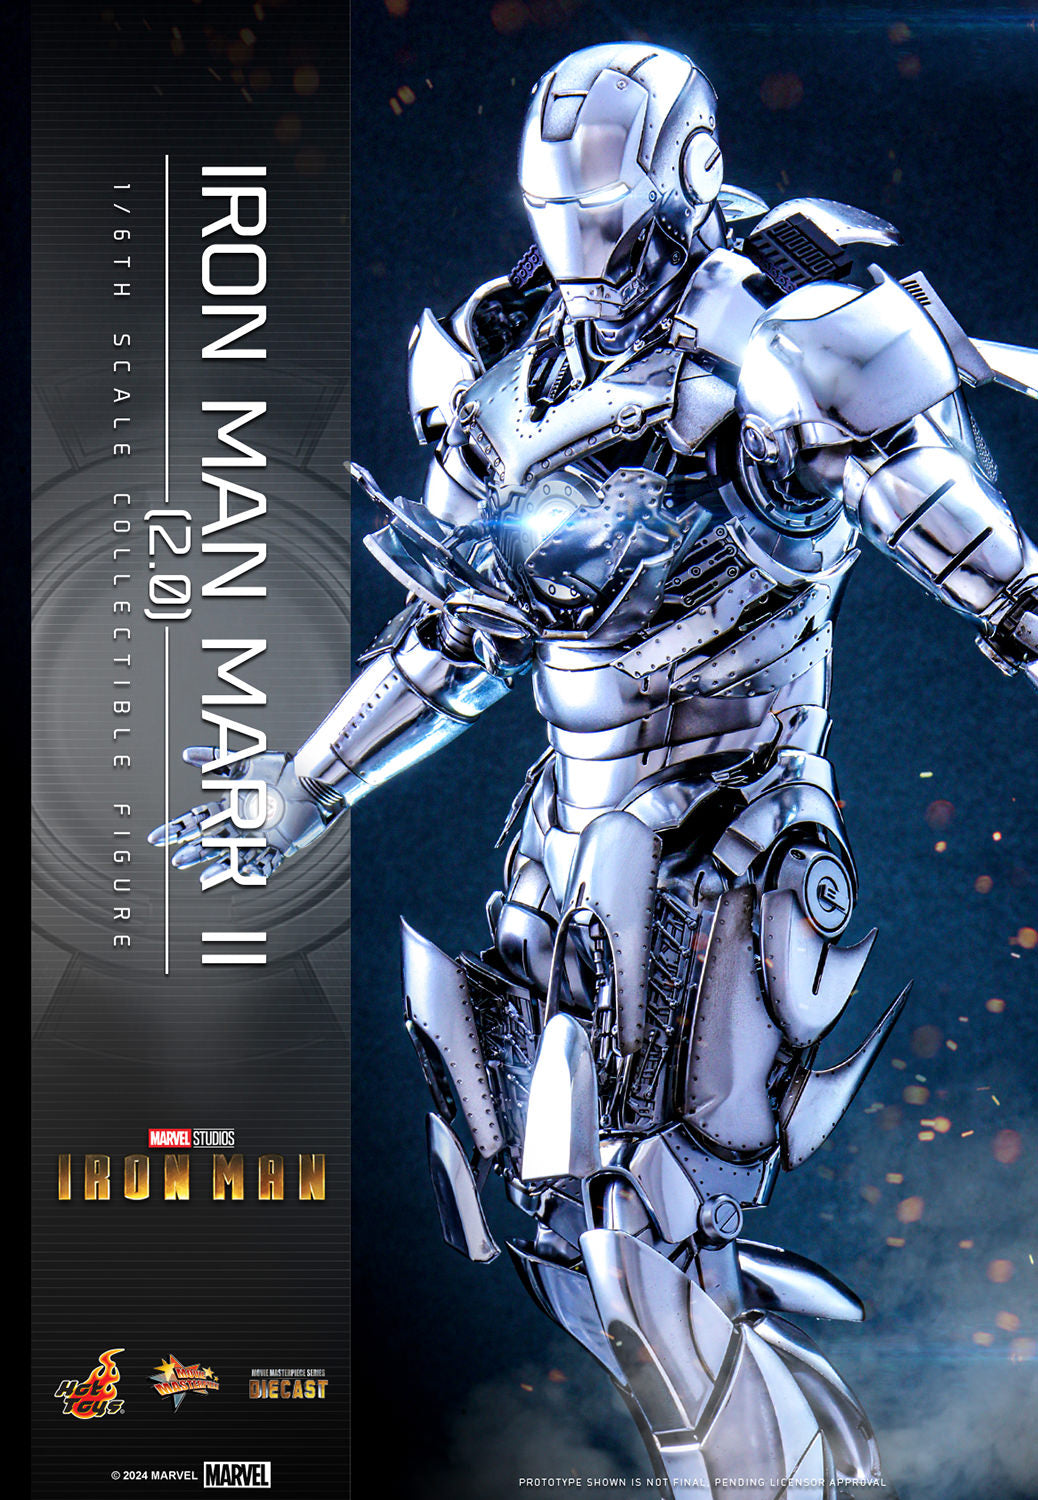 Iron Man Mark II (2.0) Sixth Scale Figure by Hot Toys